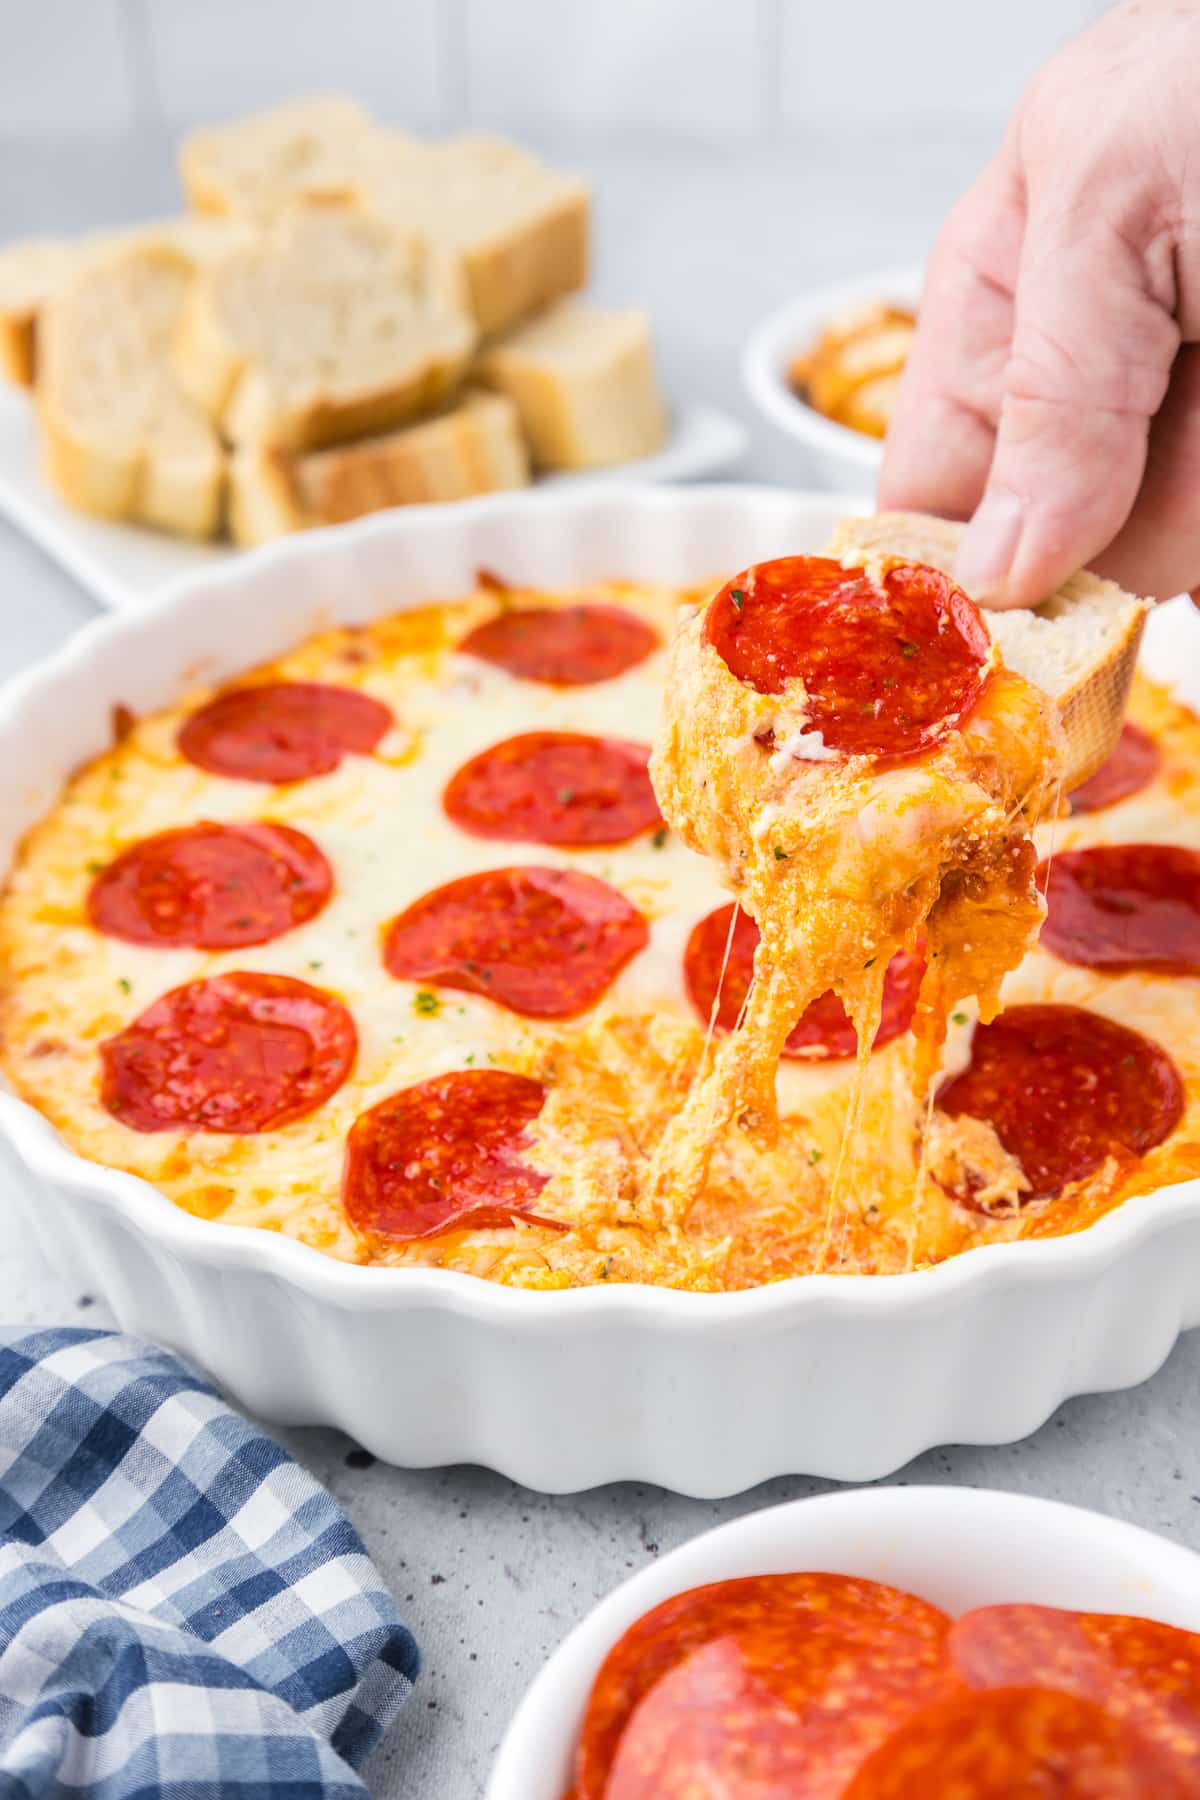 A person dipping a slice of bread into pepperoni dip in a round dish.